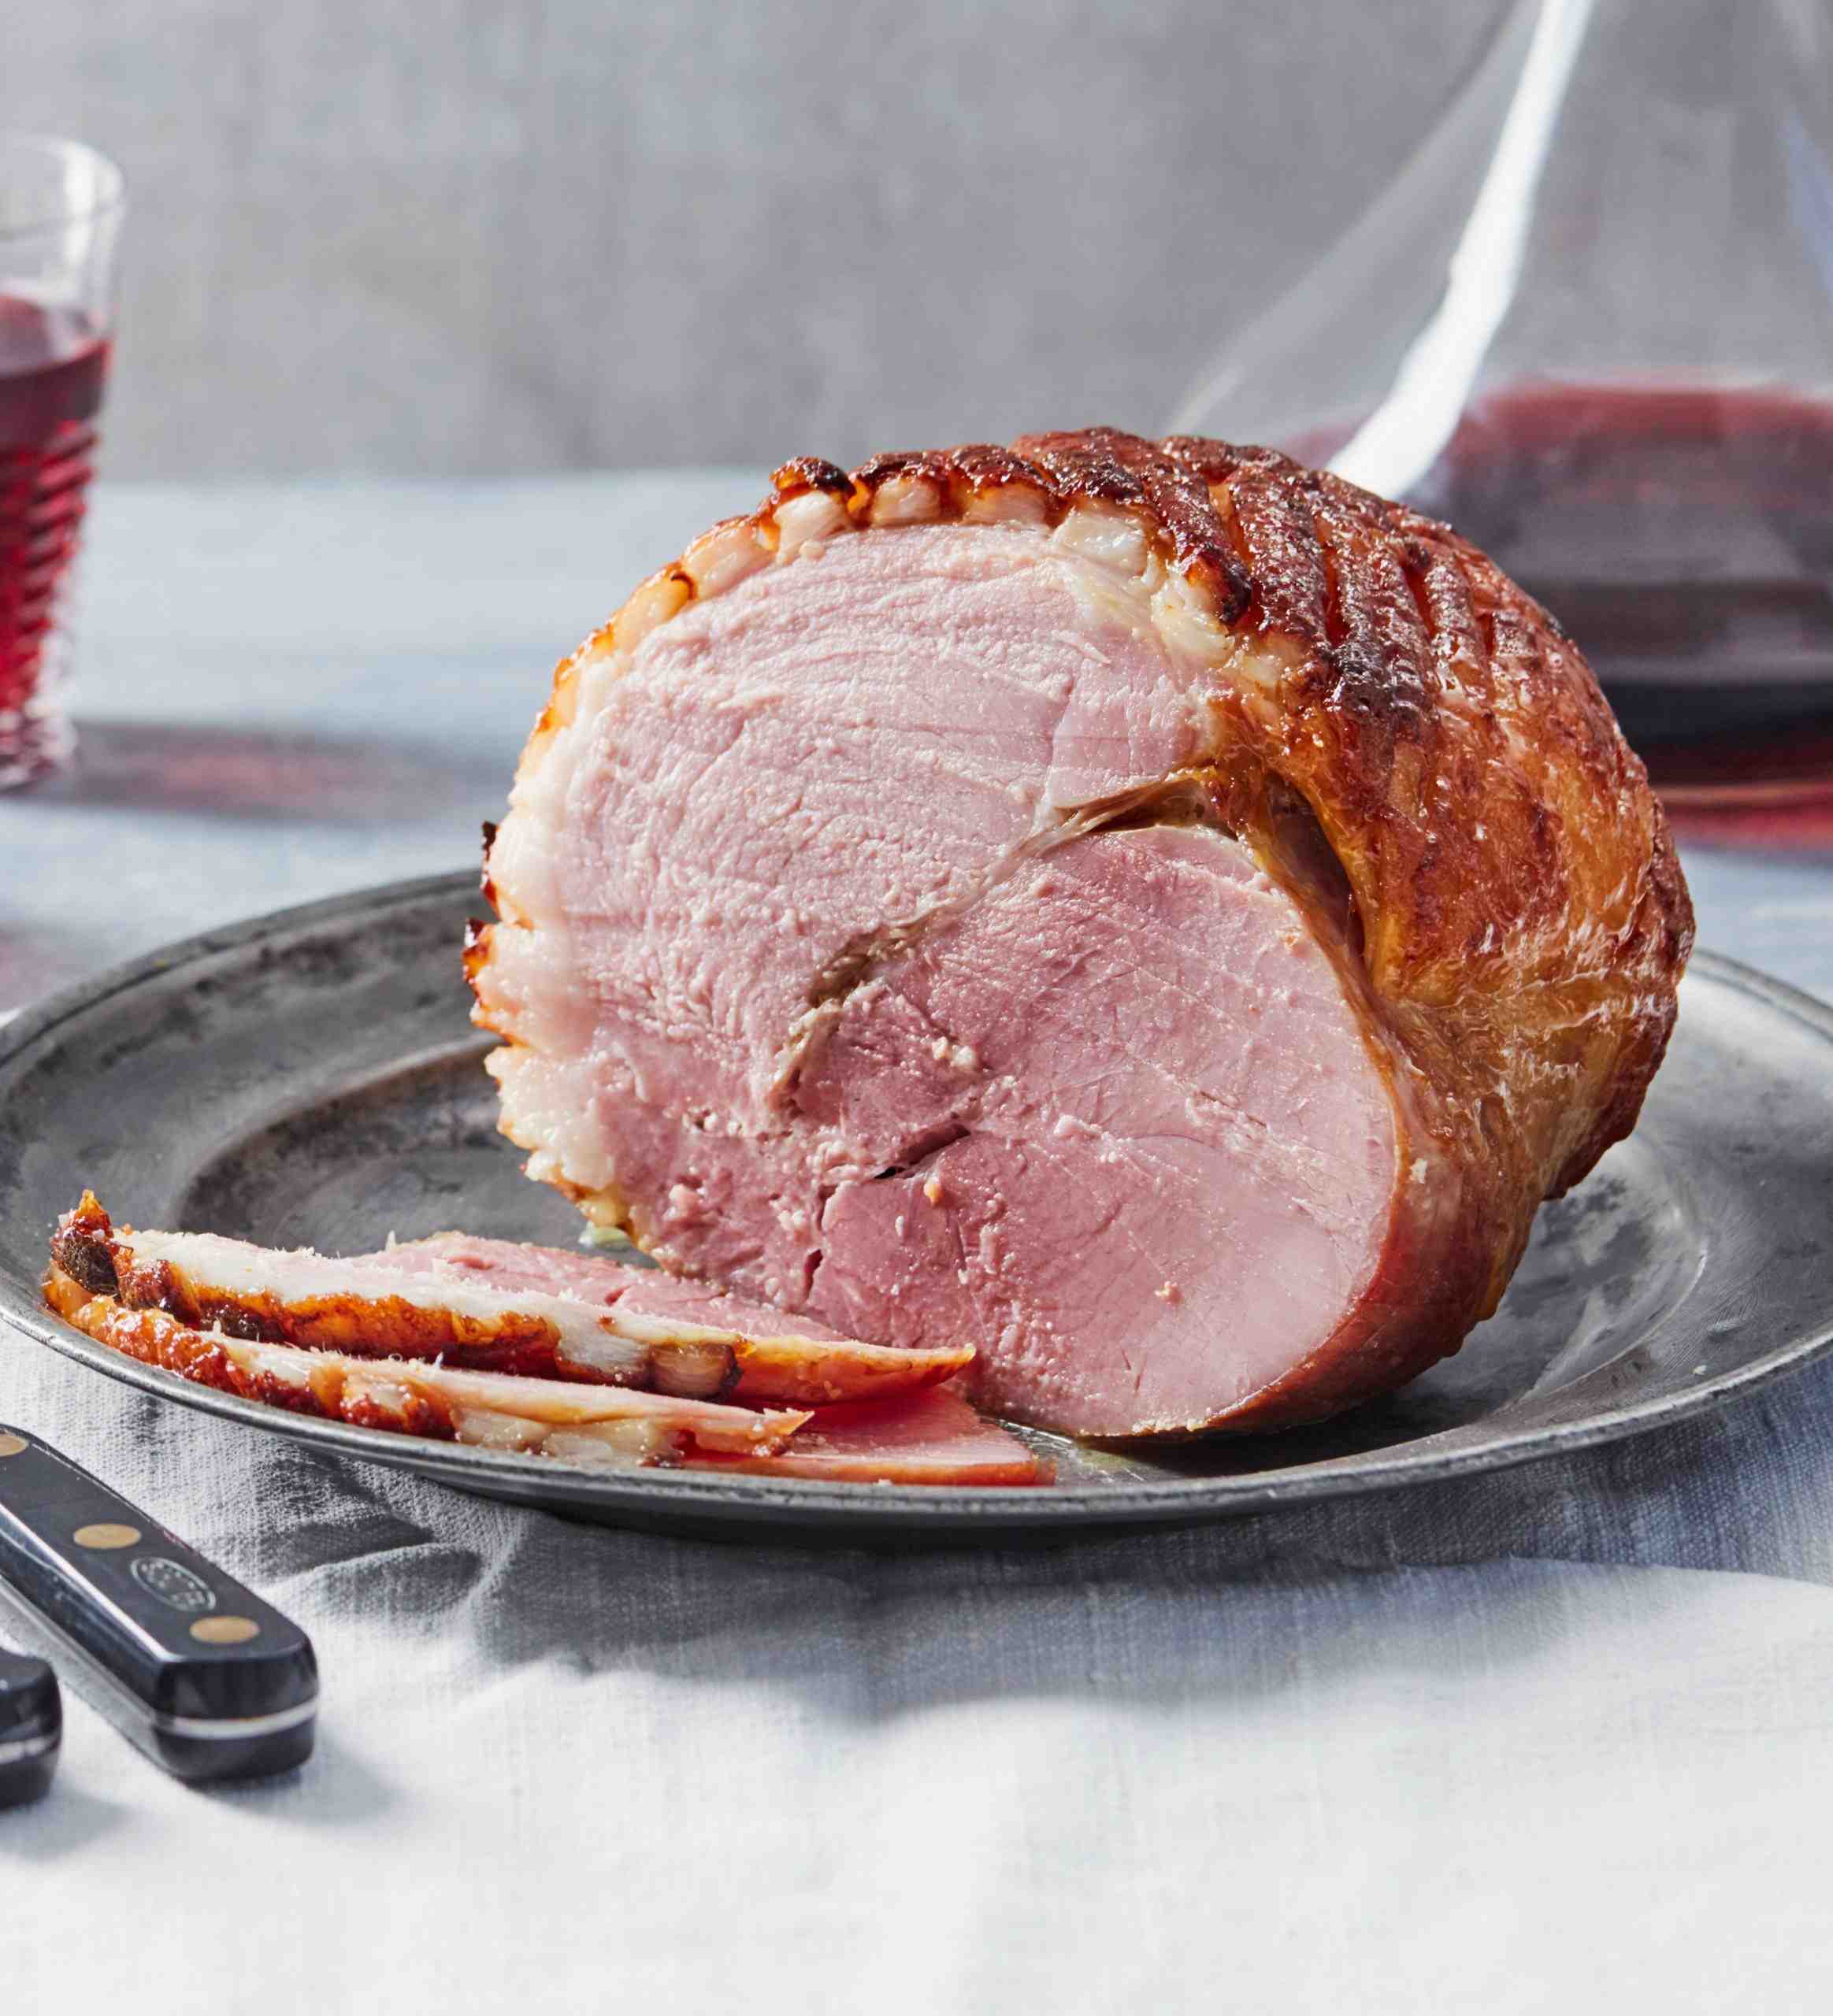 Can I use gammon instead of bacon?